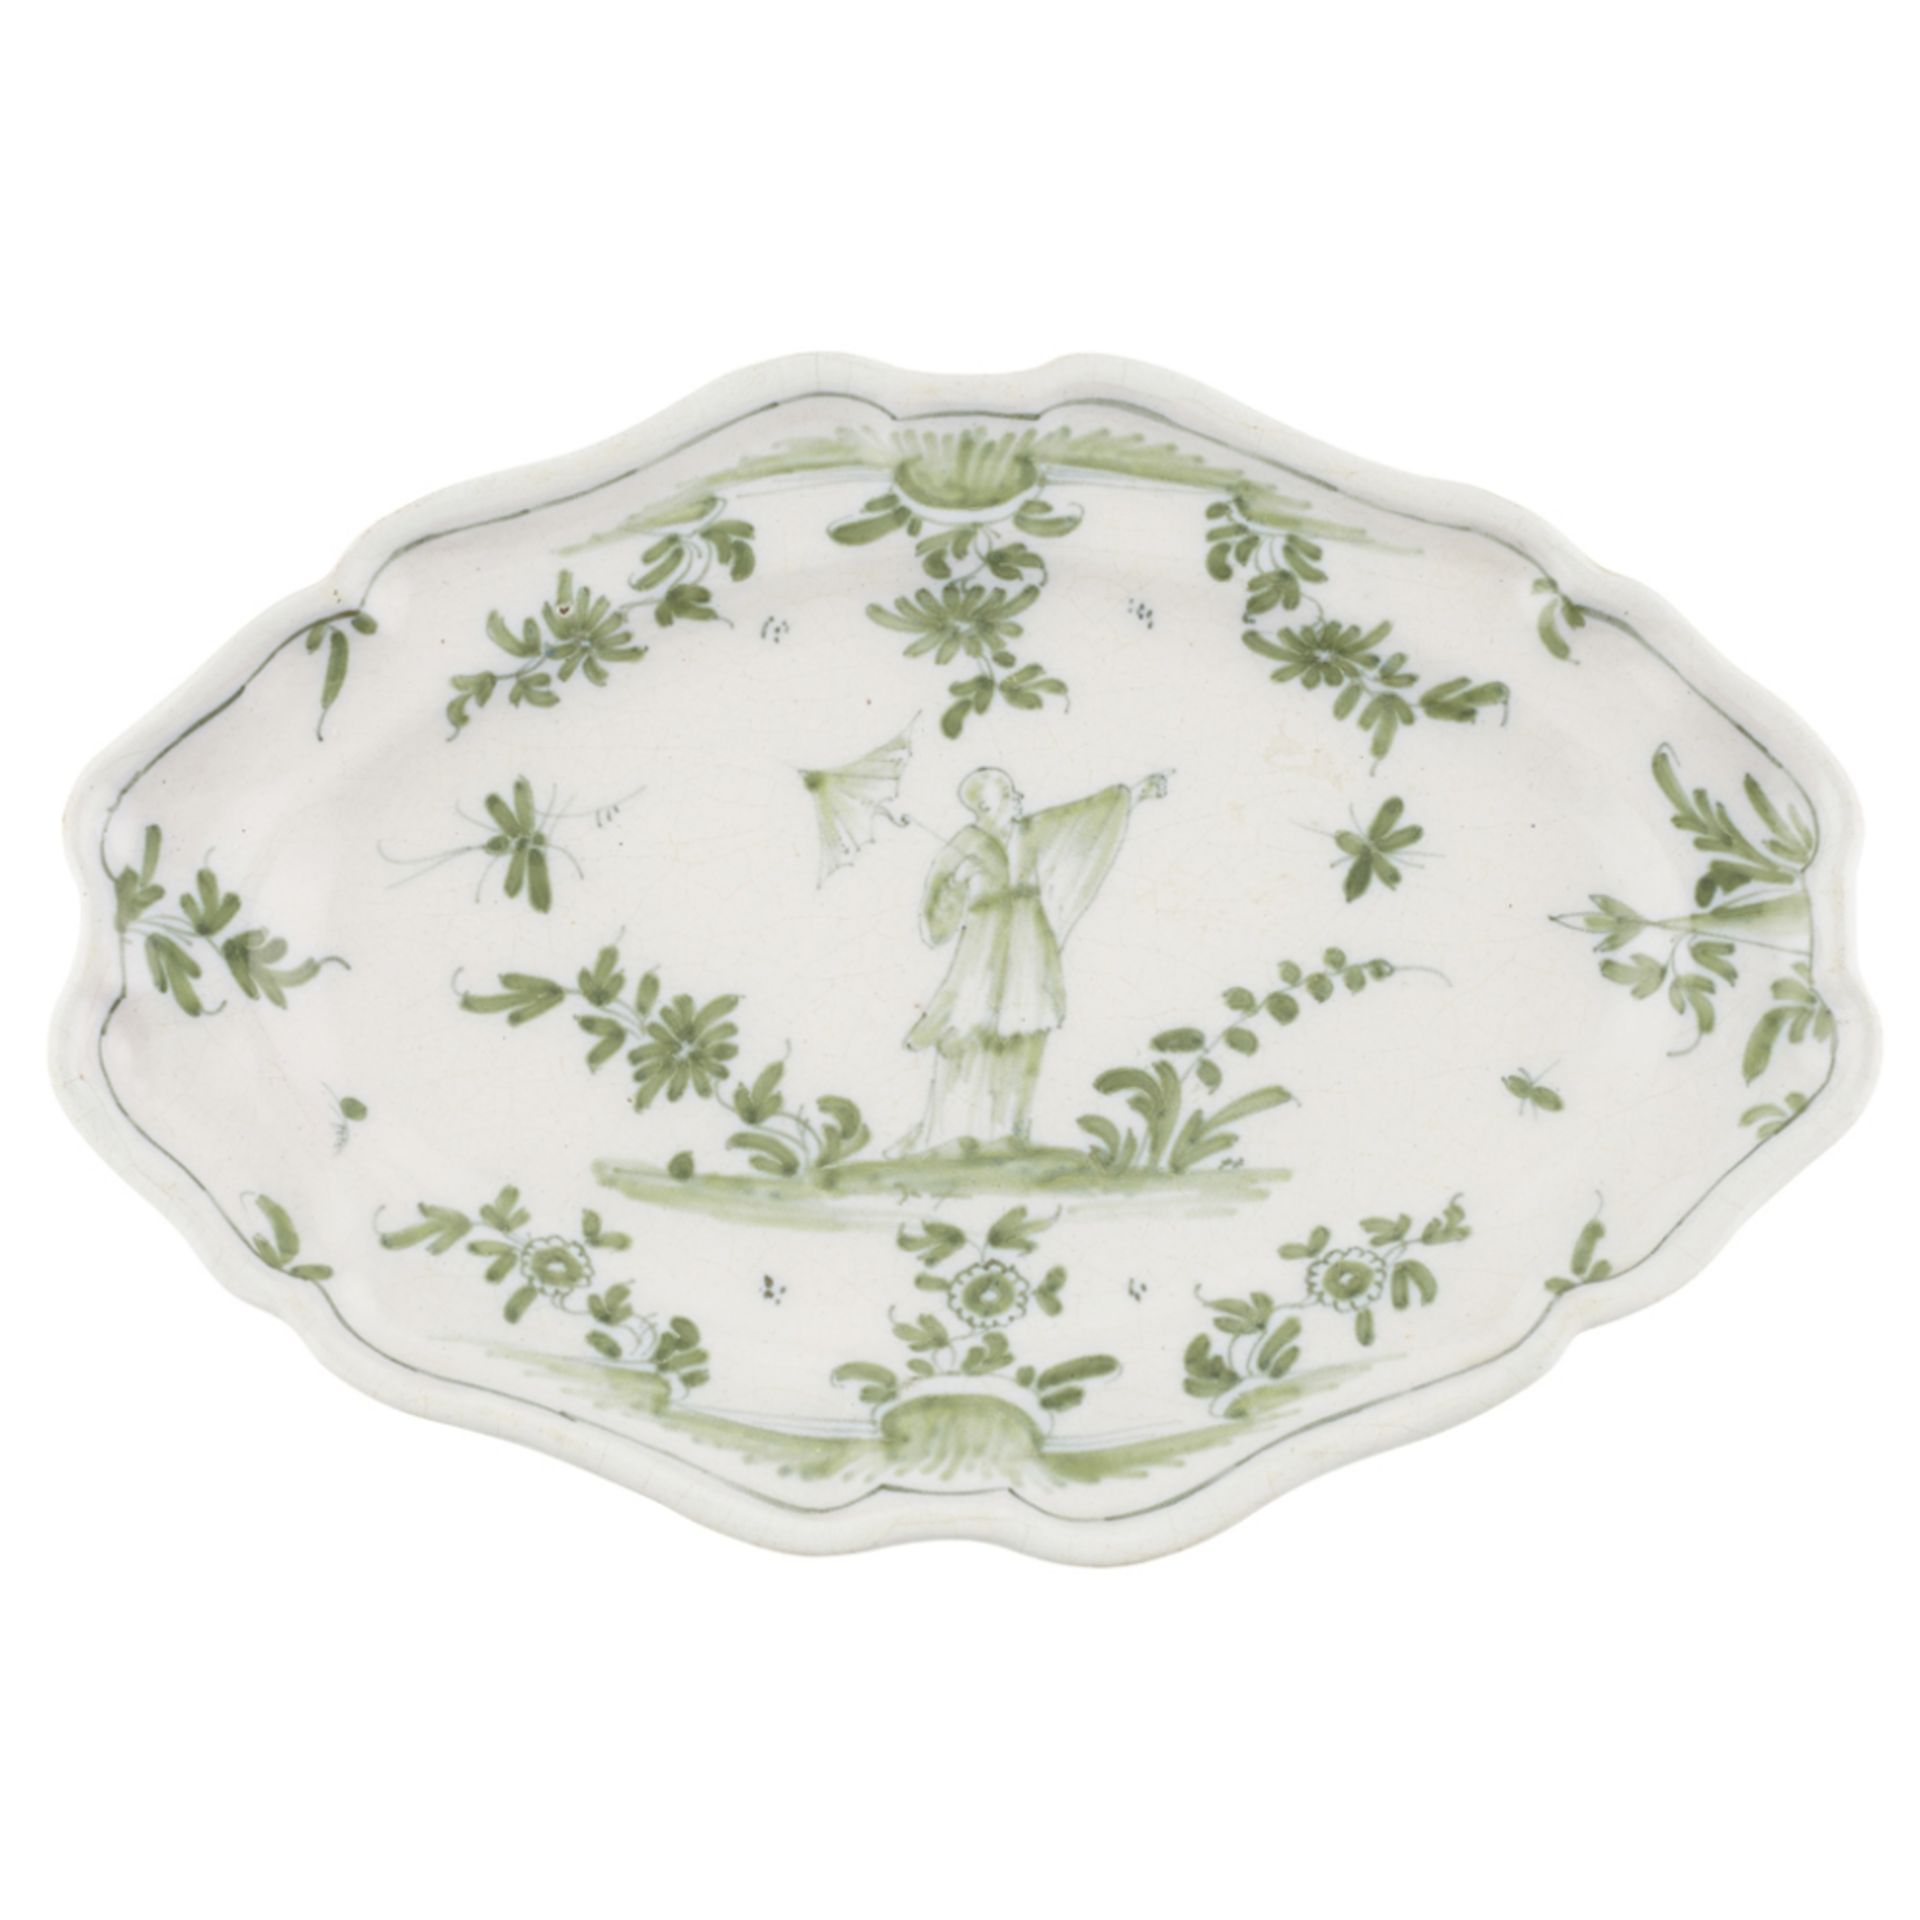 THREE MONOCHROME FRENCH FAIENCE PLATTERS18TH CENTURY of shaped oval form with lobed rims, comprising - Image 2 of 4